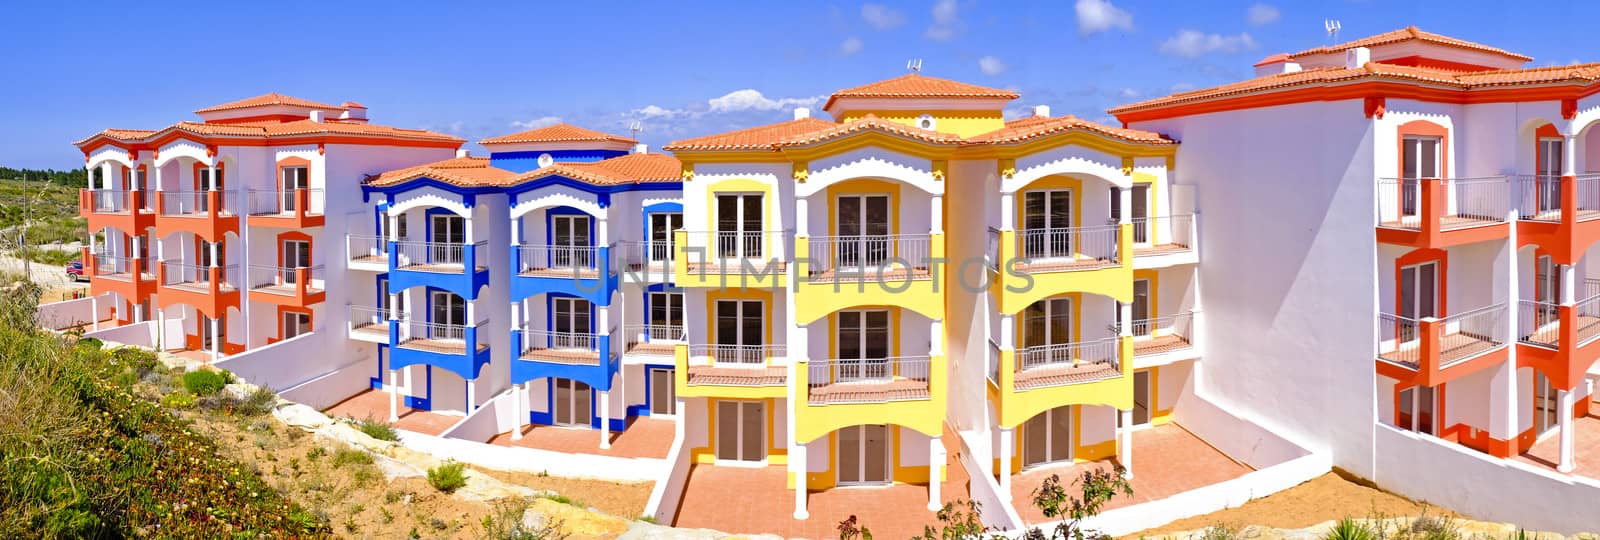 Colorful new  appartments in the countryside